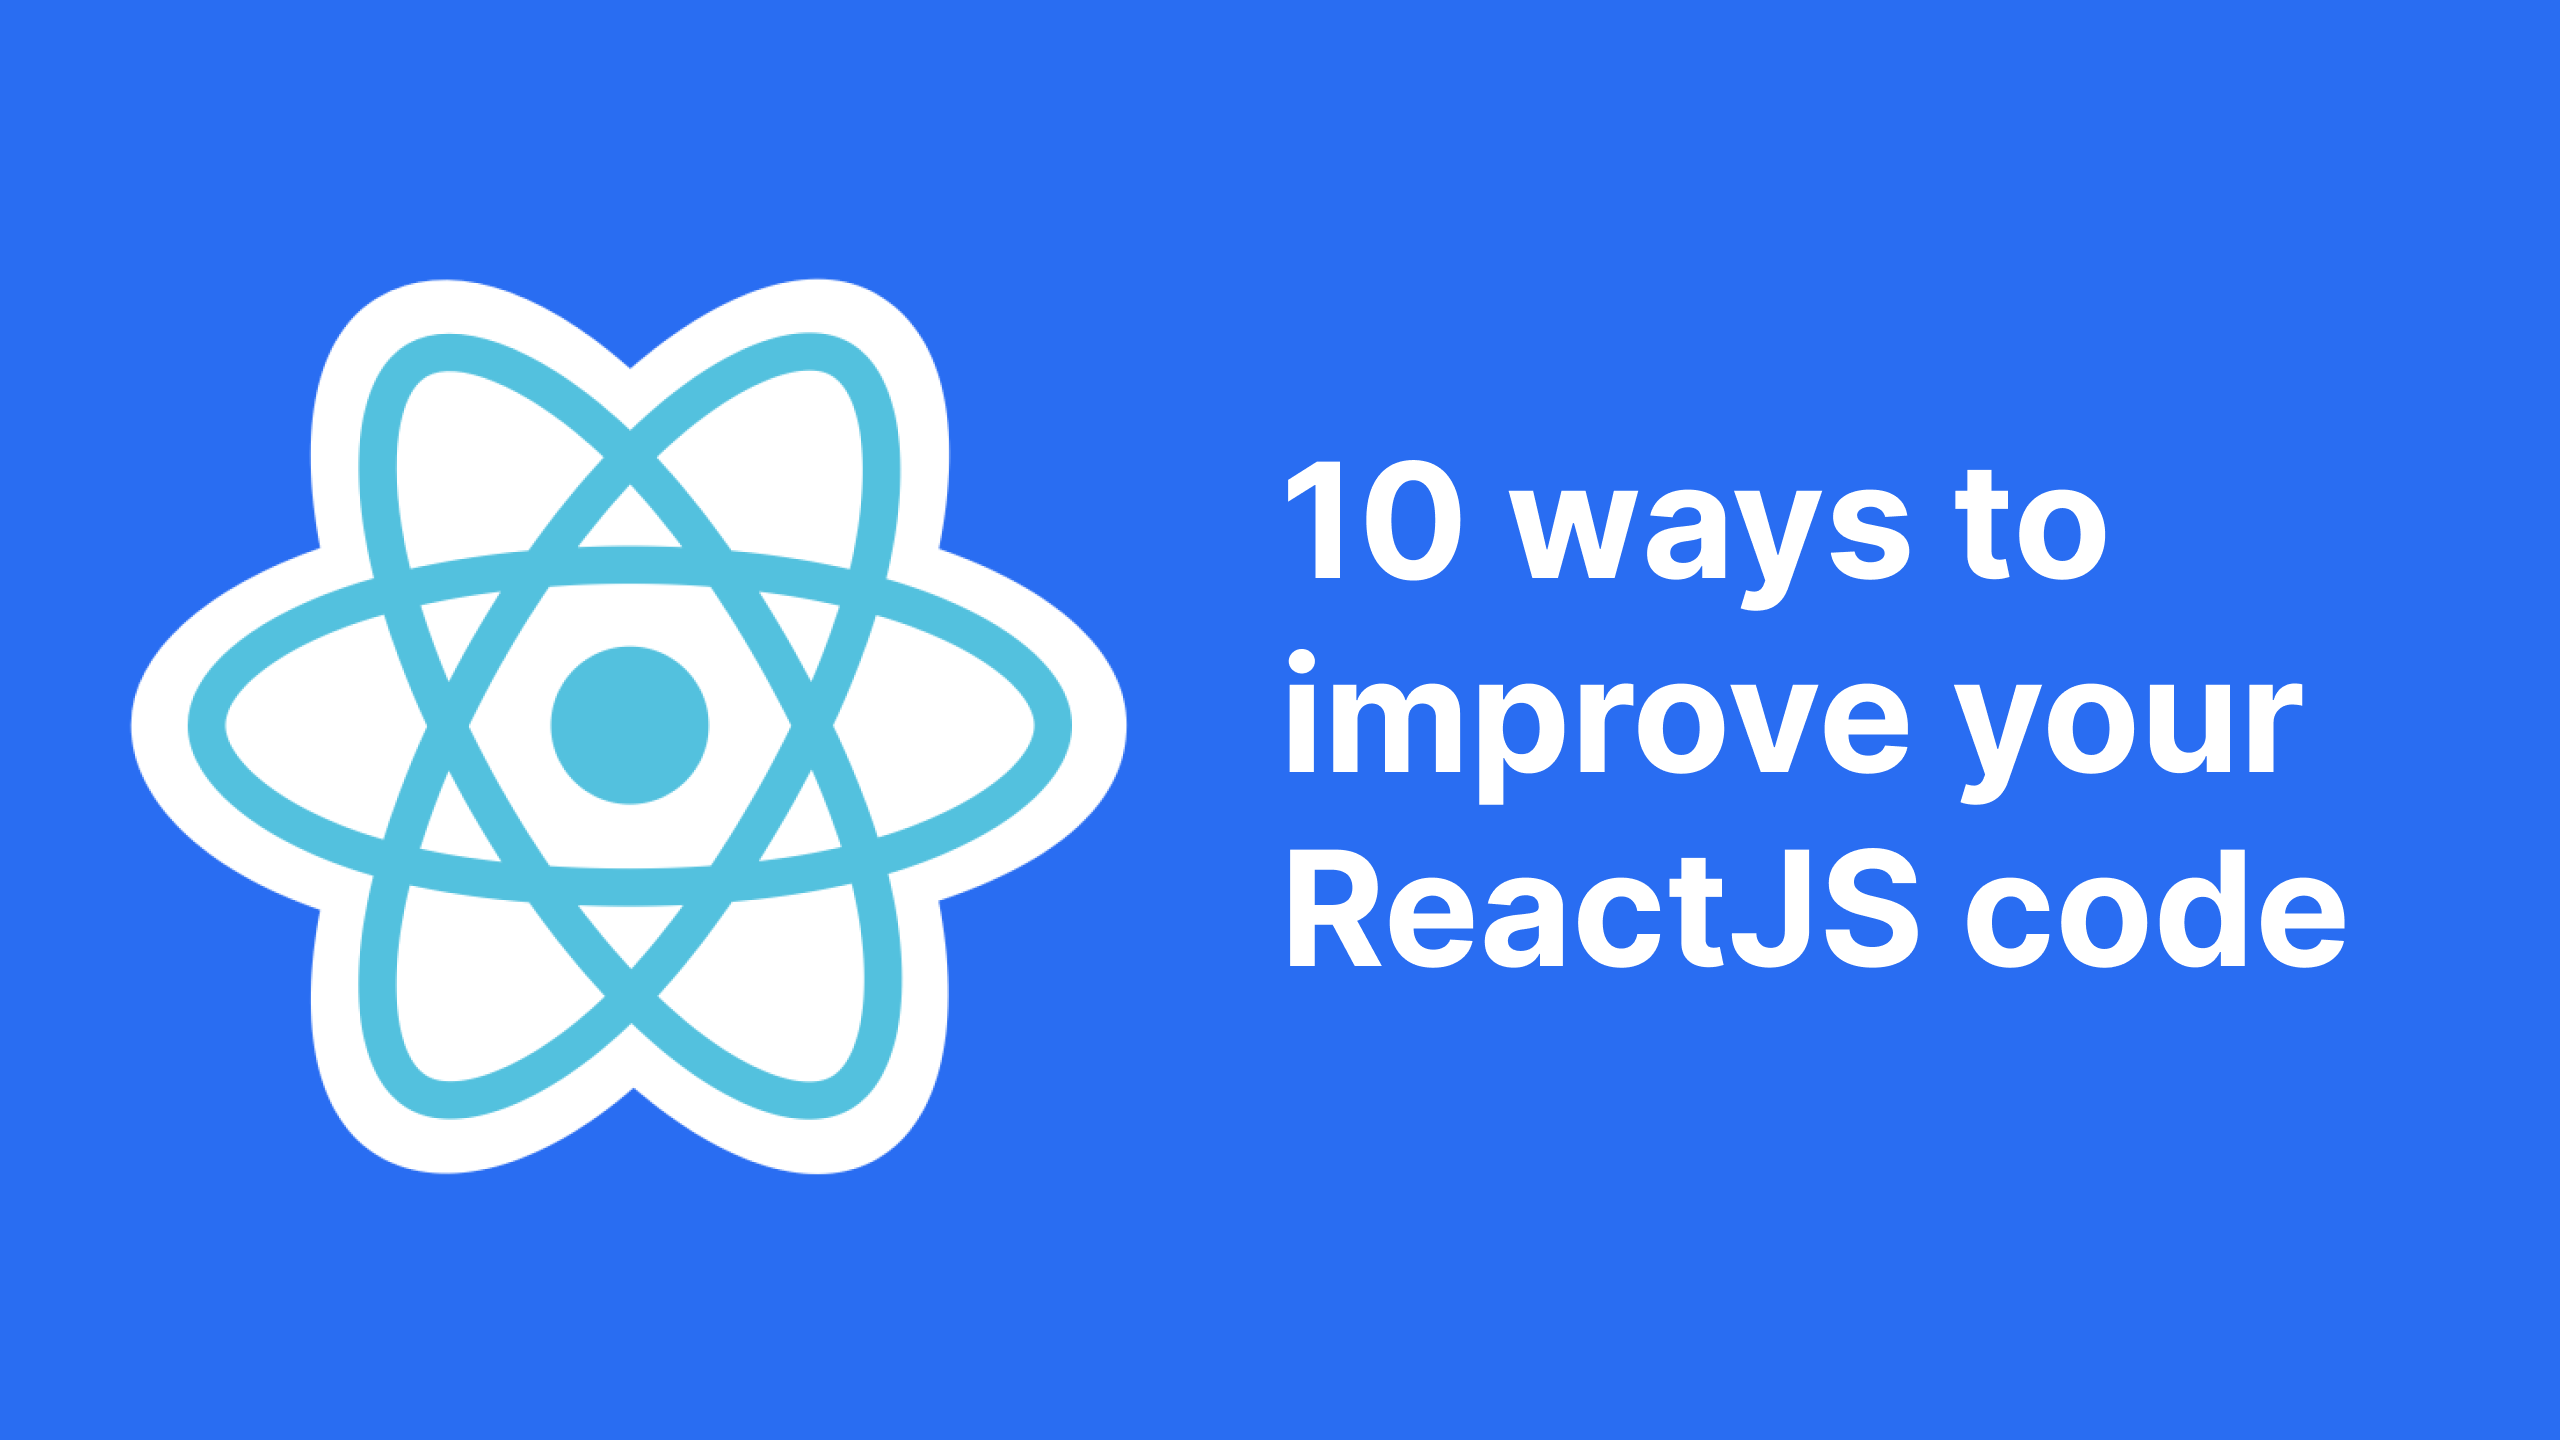 How to Improve Your ReactJS Code – Tips for Code Readability and Performance